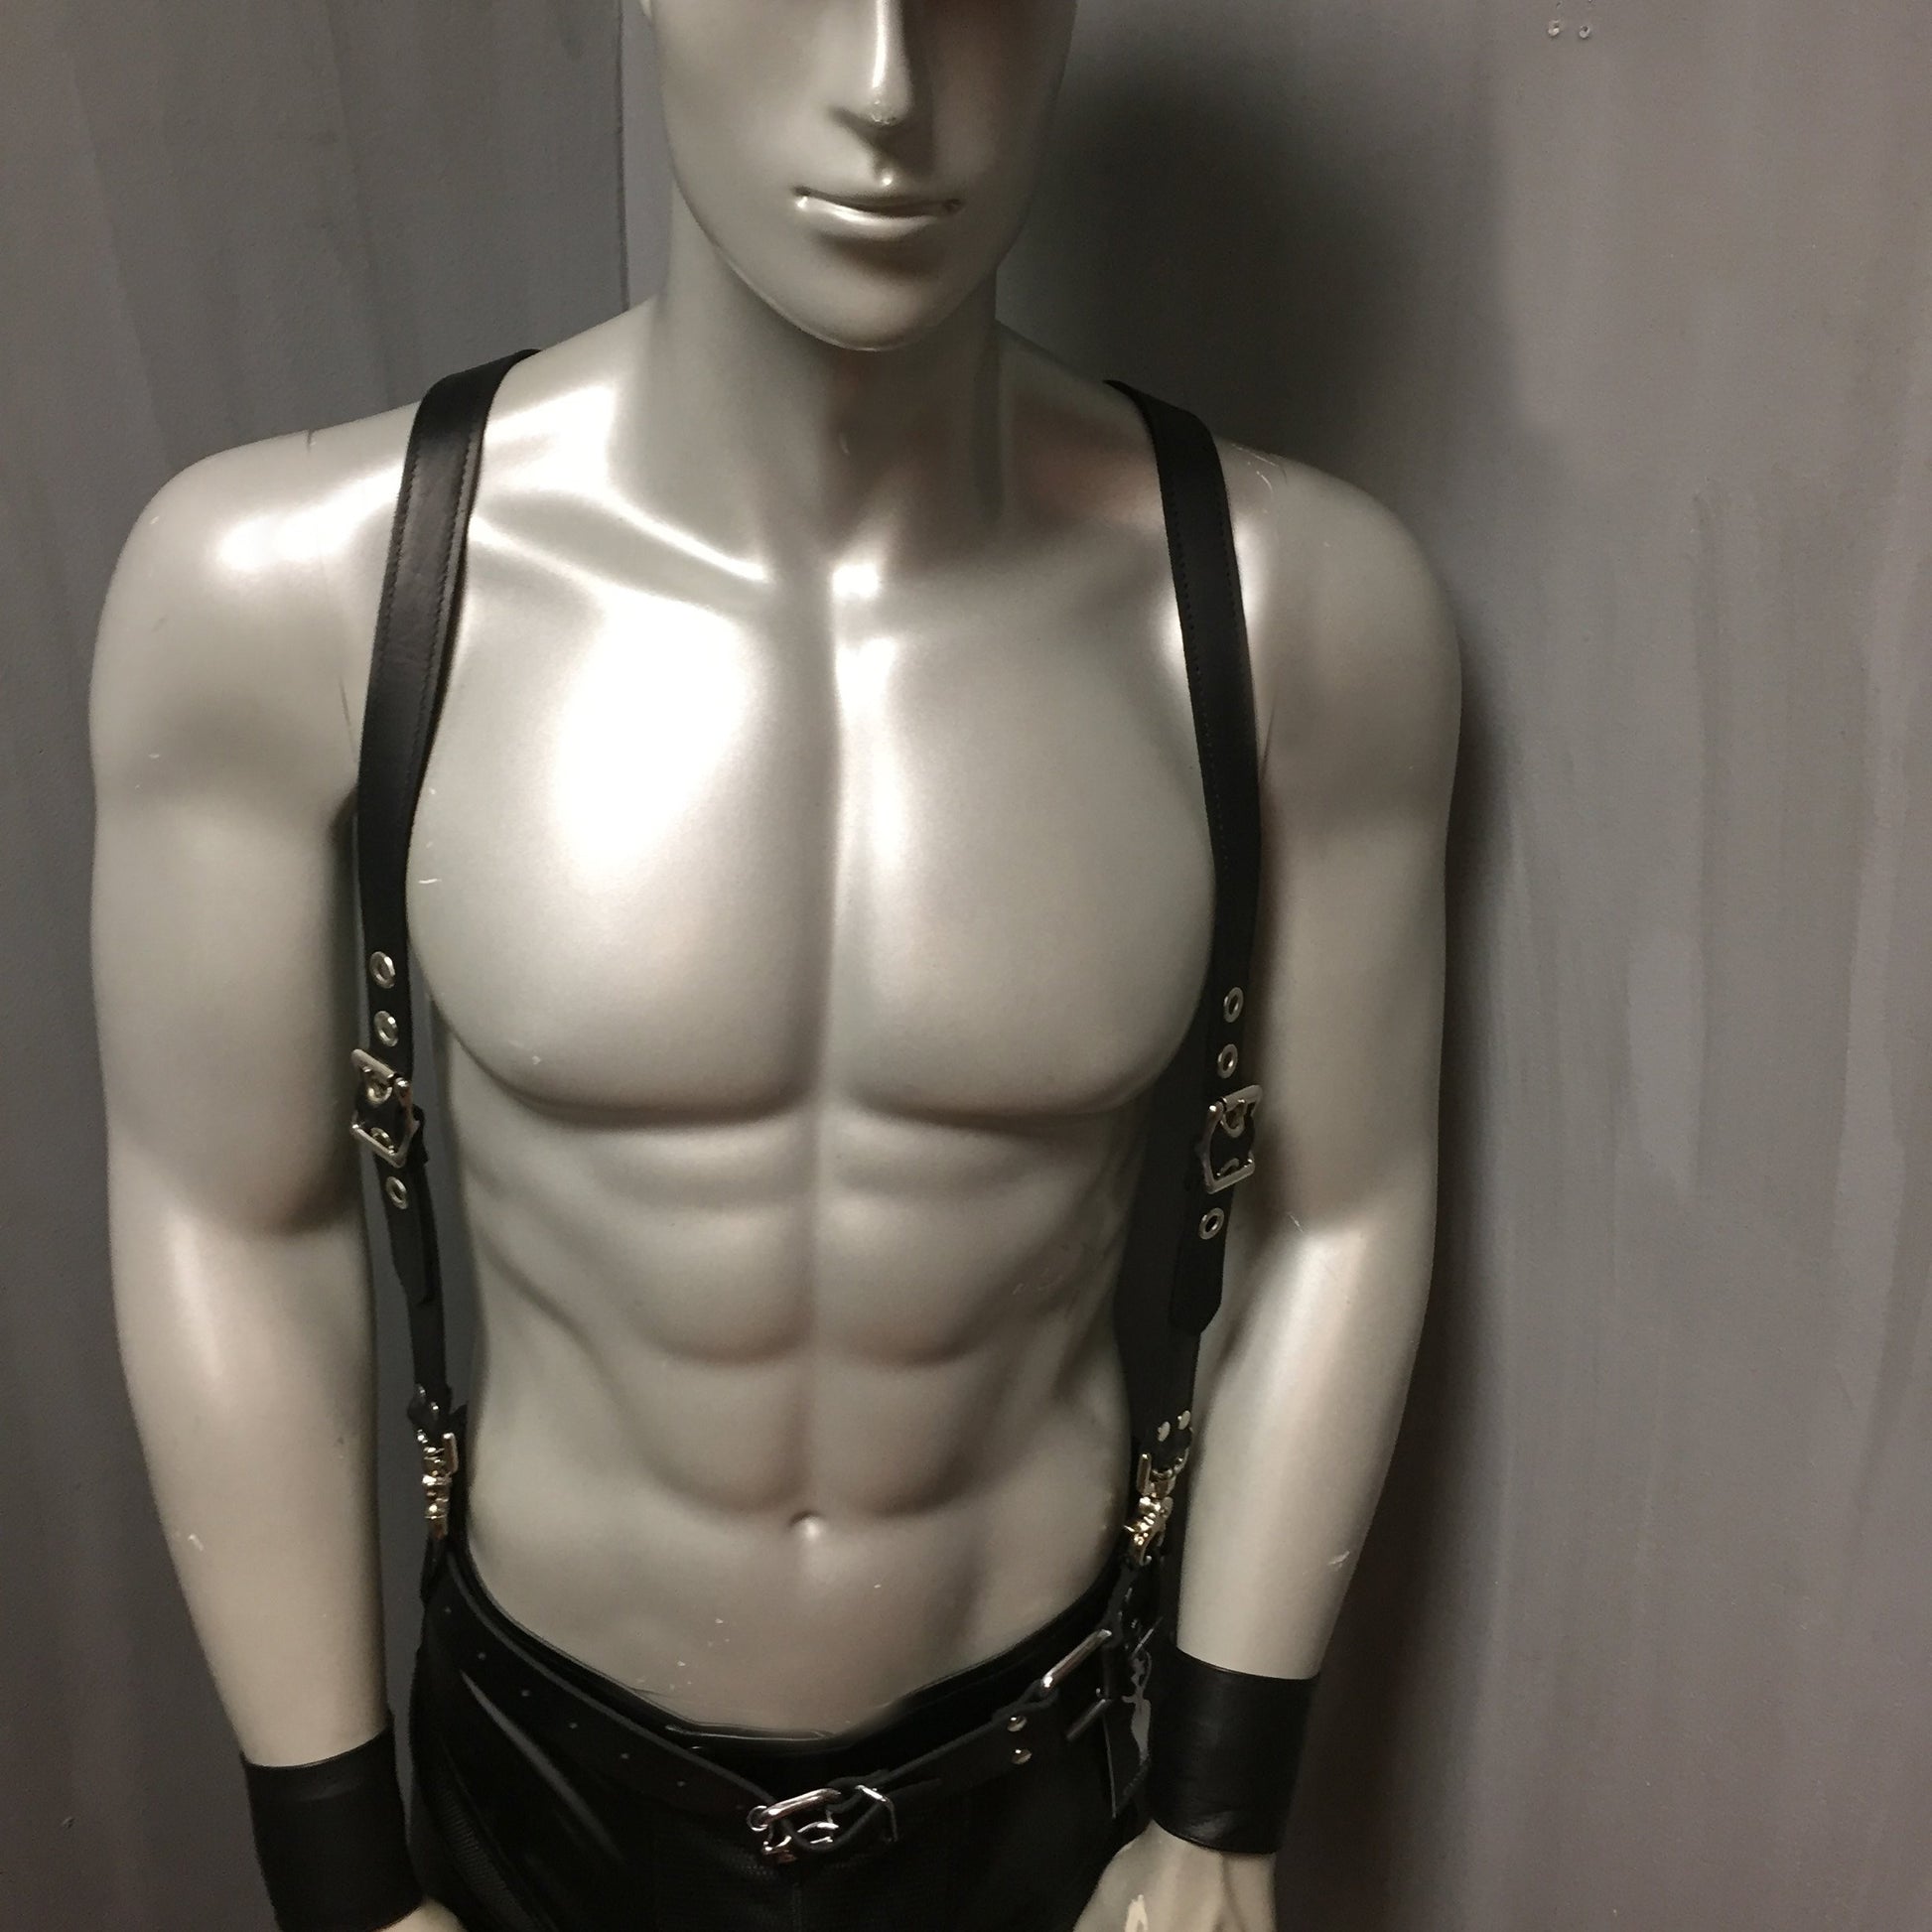 Front view of the Suspenders on mannequin wearing leather pants and leather armbands.